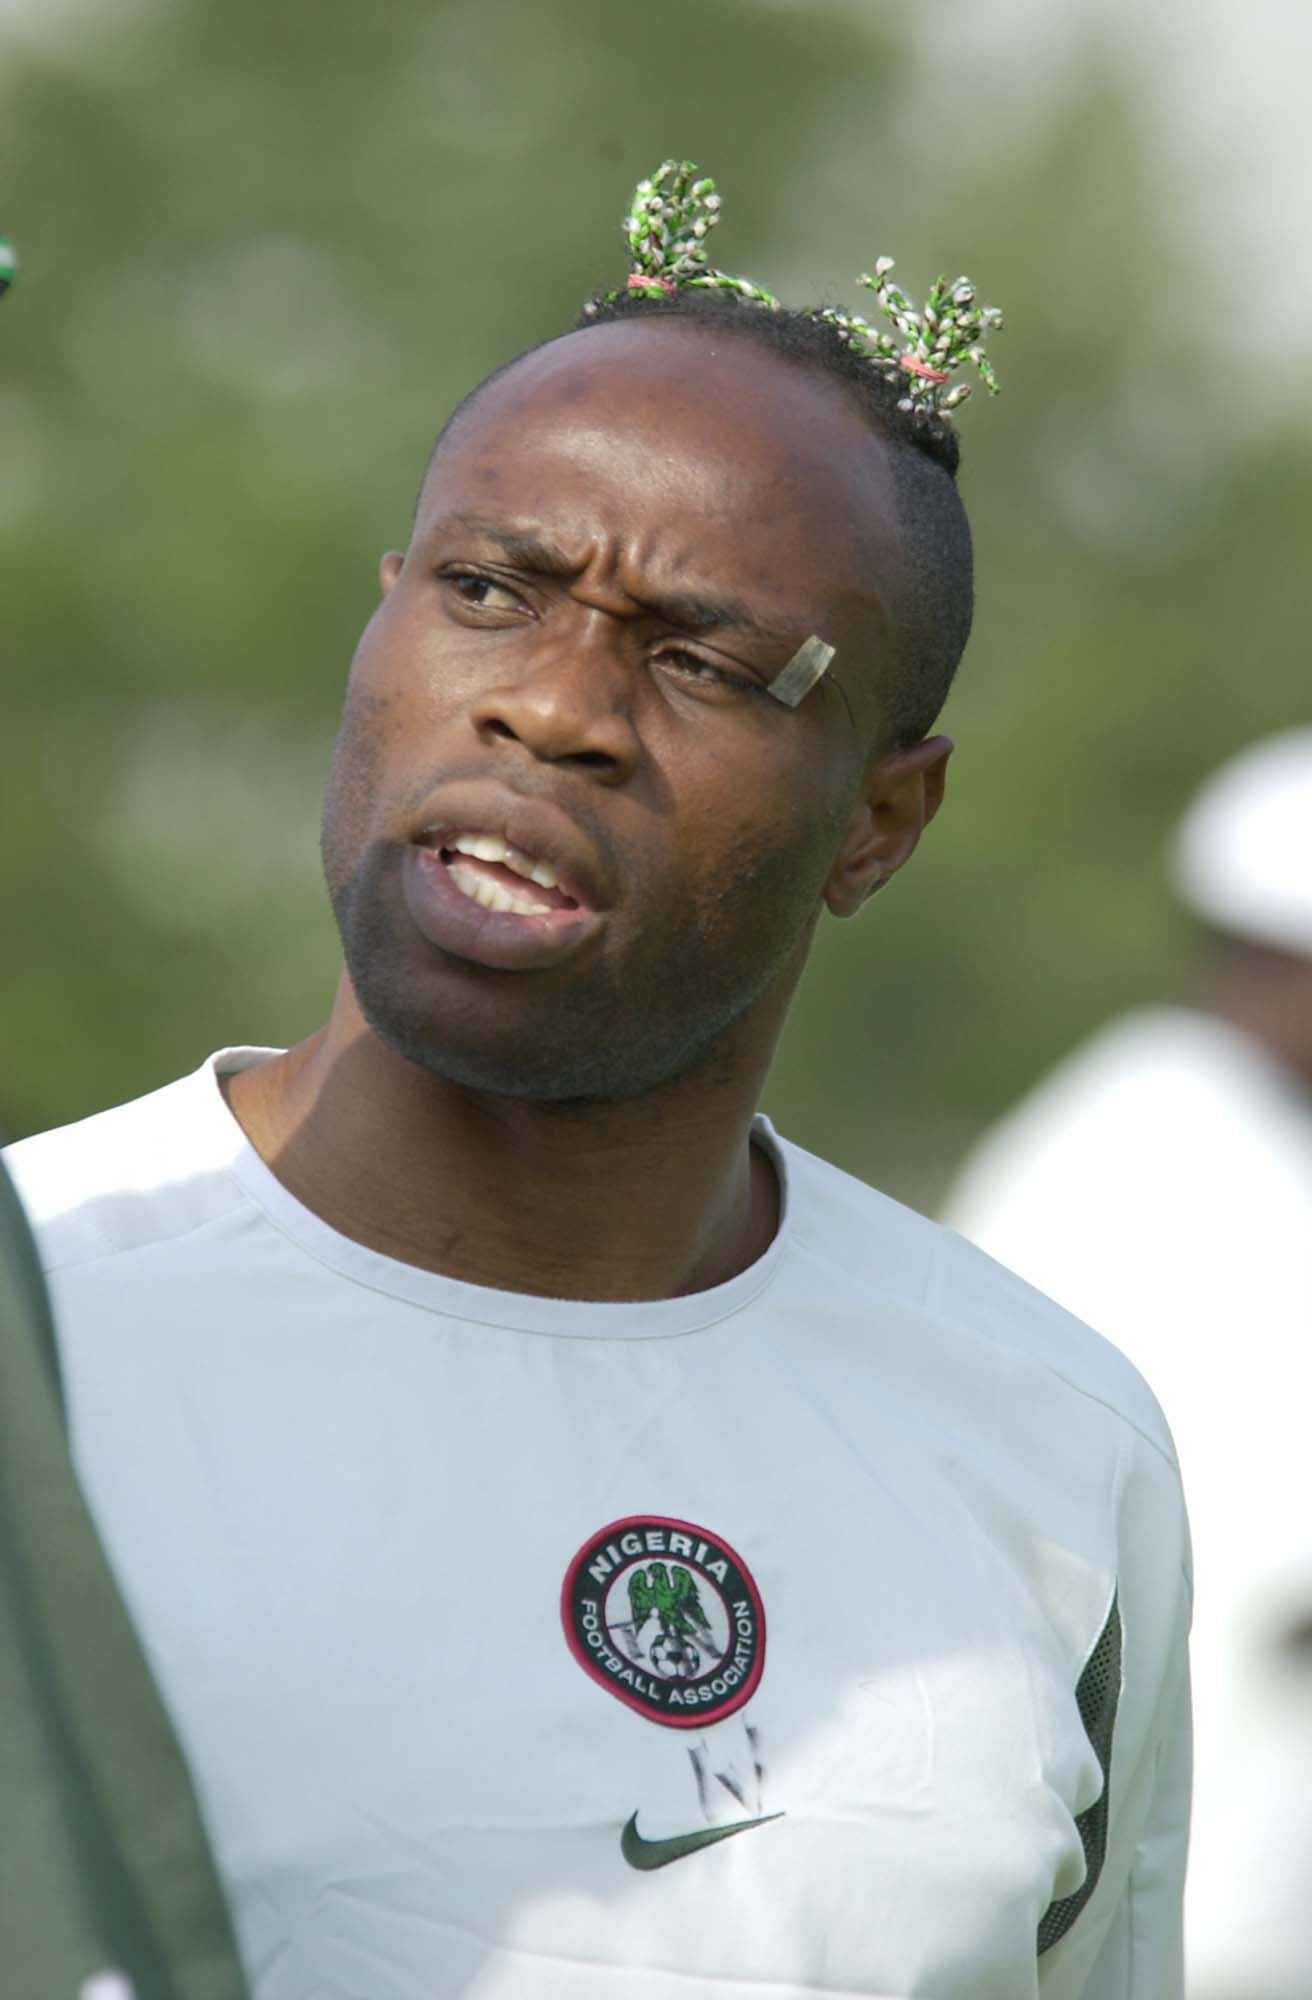 Nigeria  World Cup squad training  June 2002
in Osaka Japan prior to their match  against England
Taribo West at the Nigeria team training in Osaka.